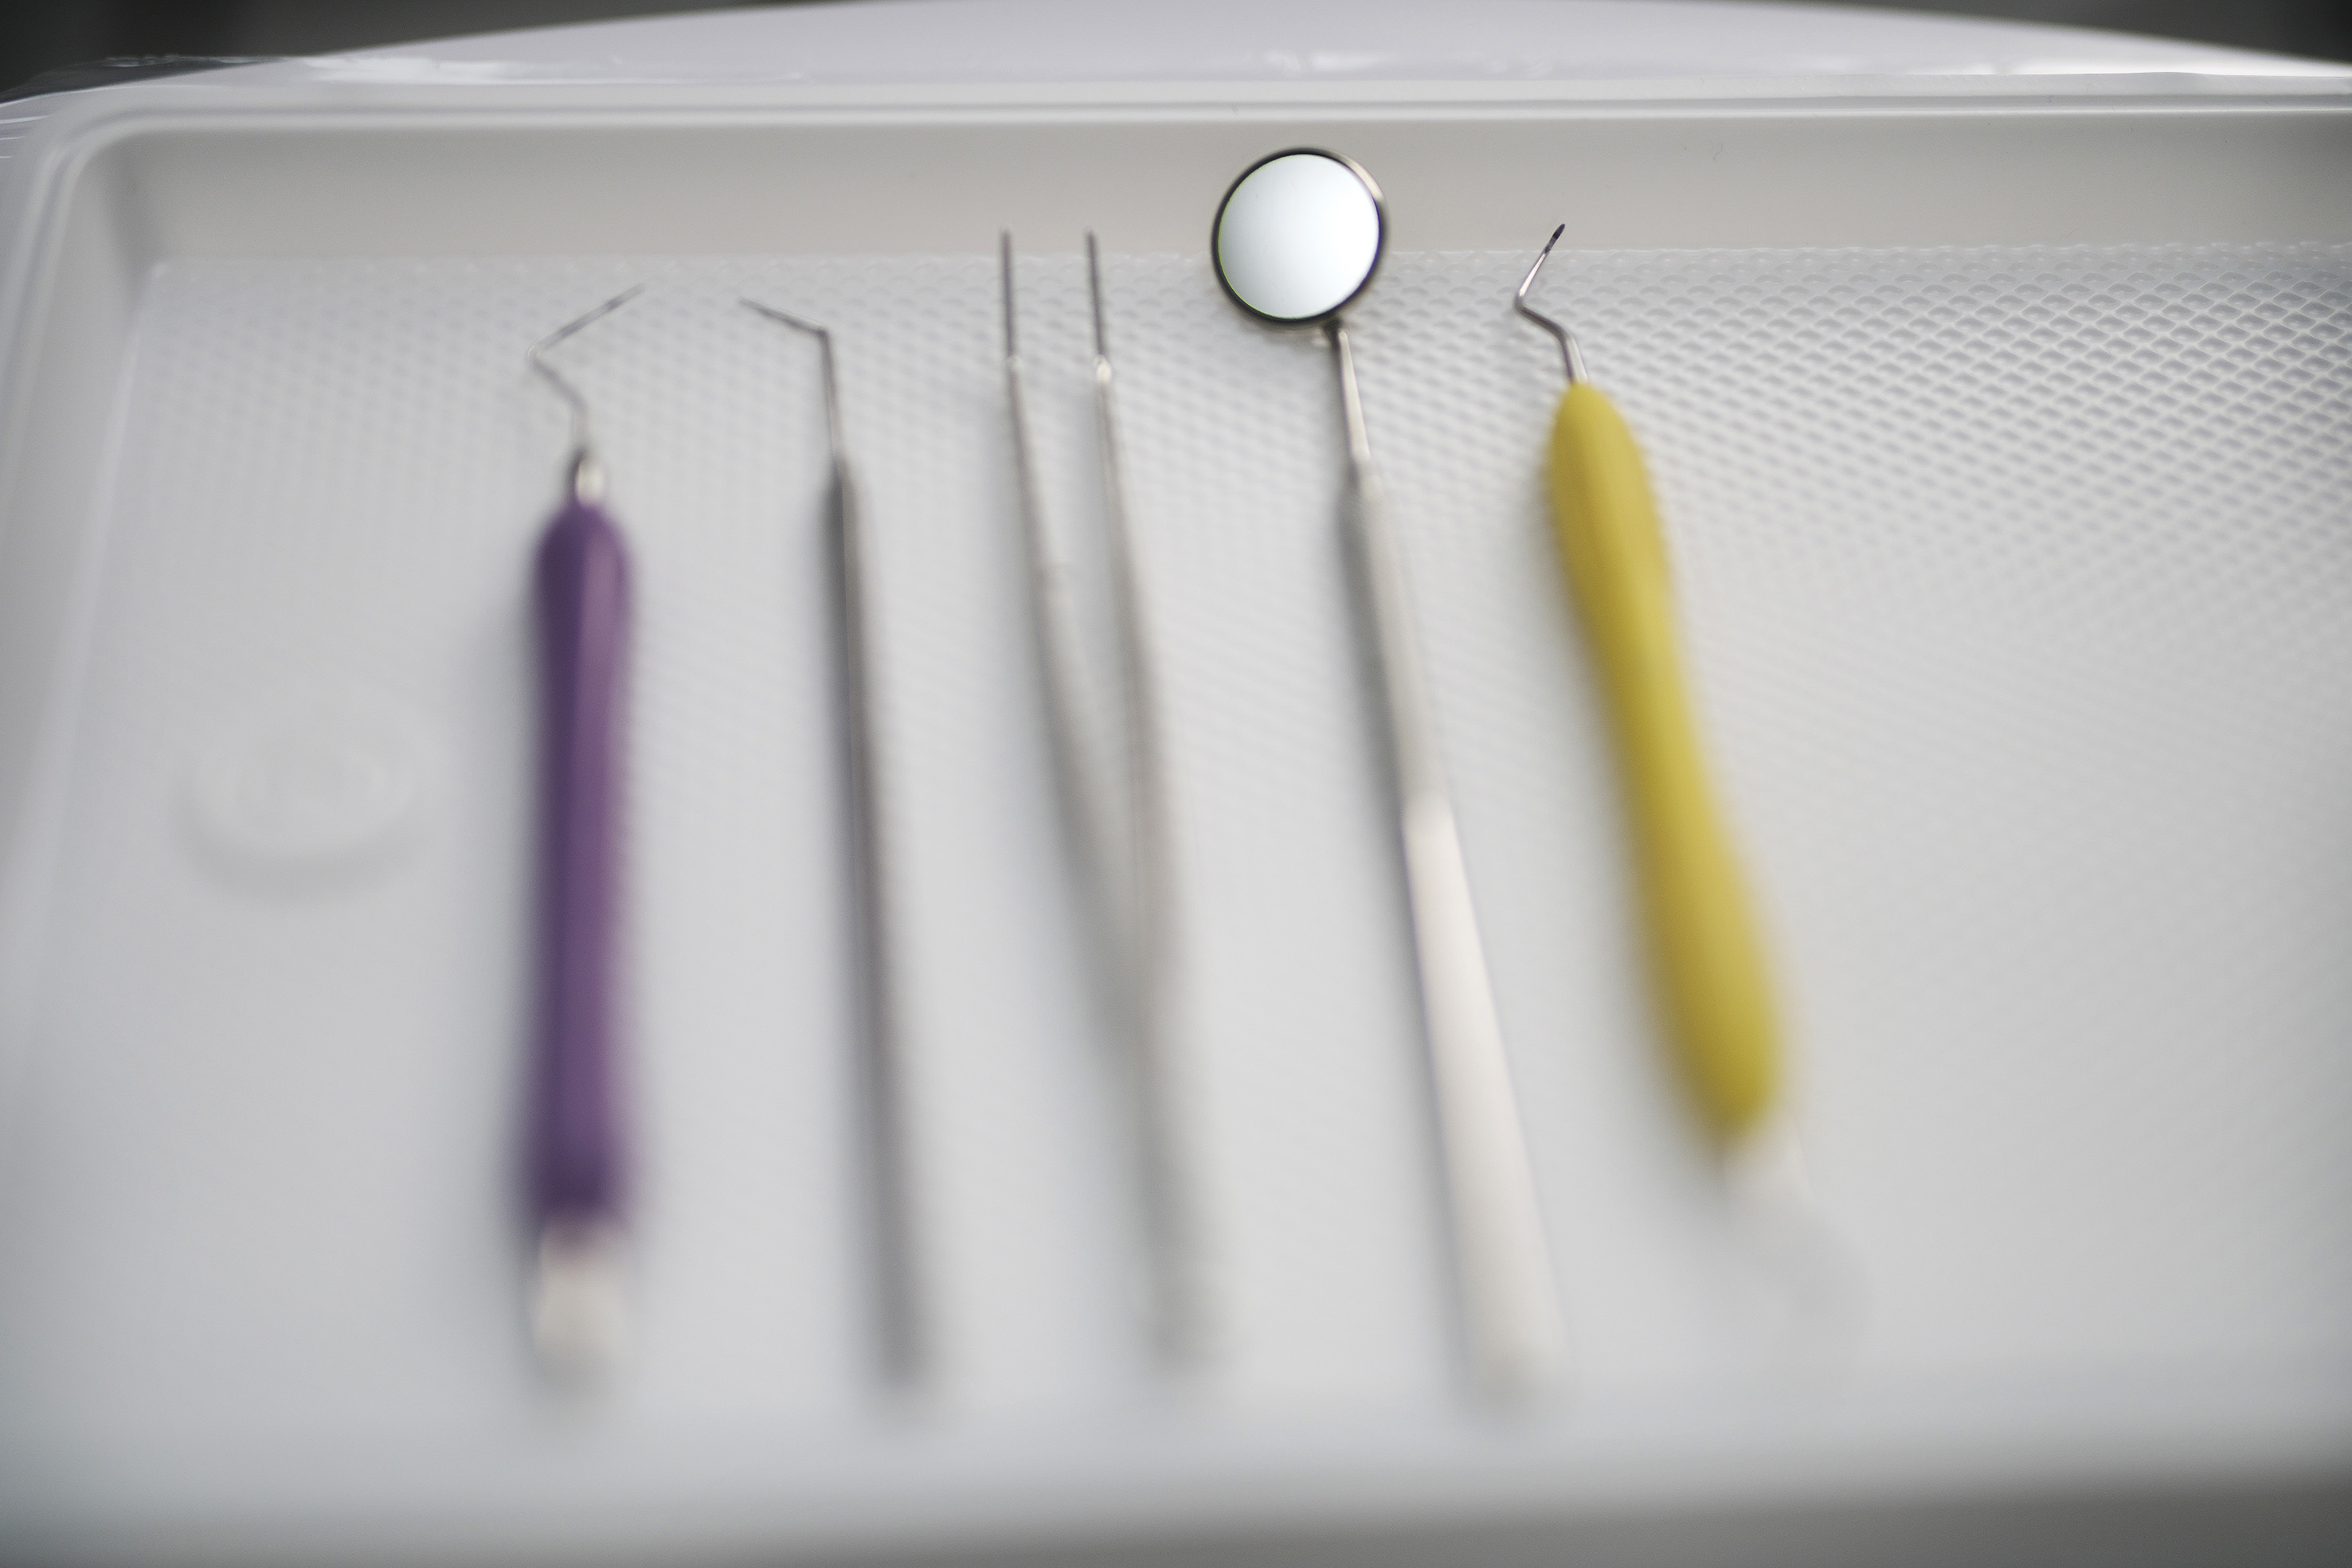 Dental instruments in a tray